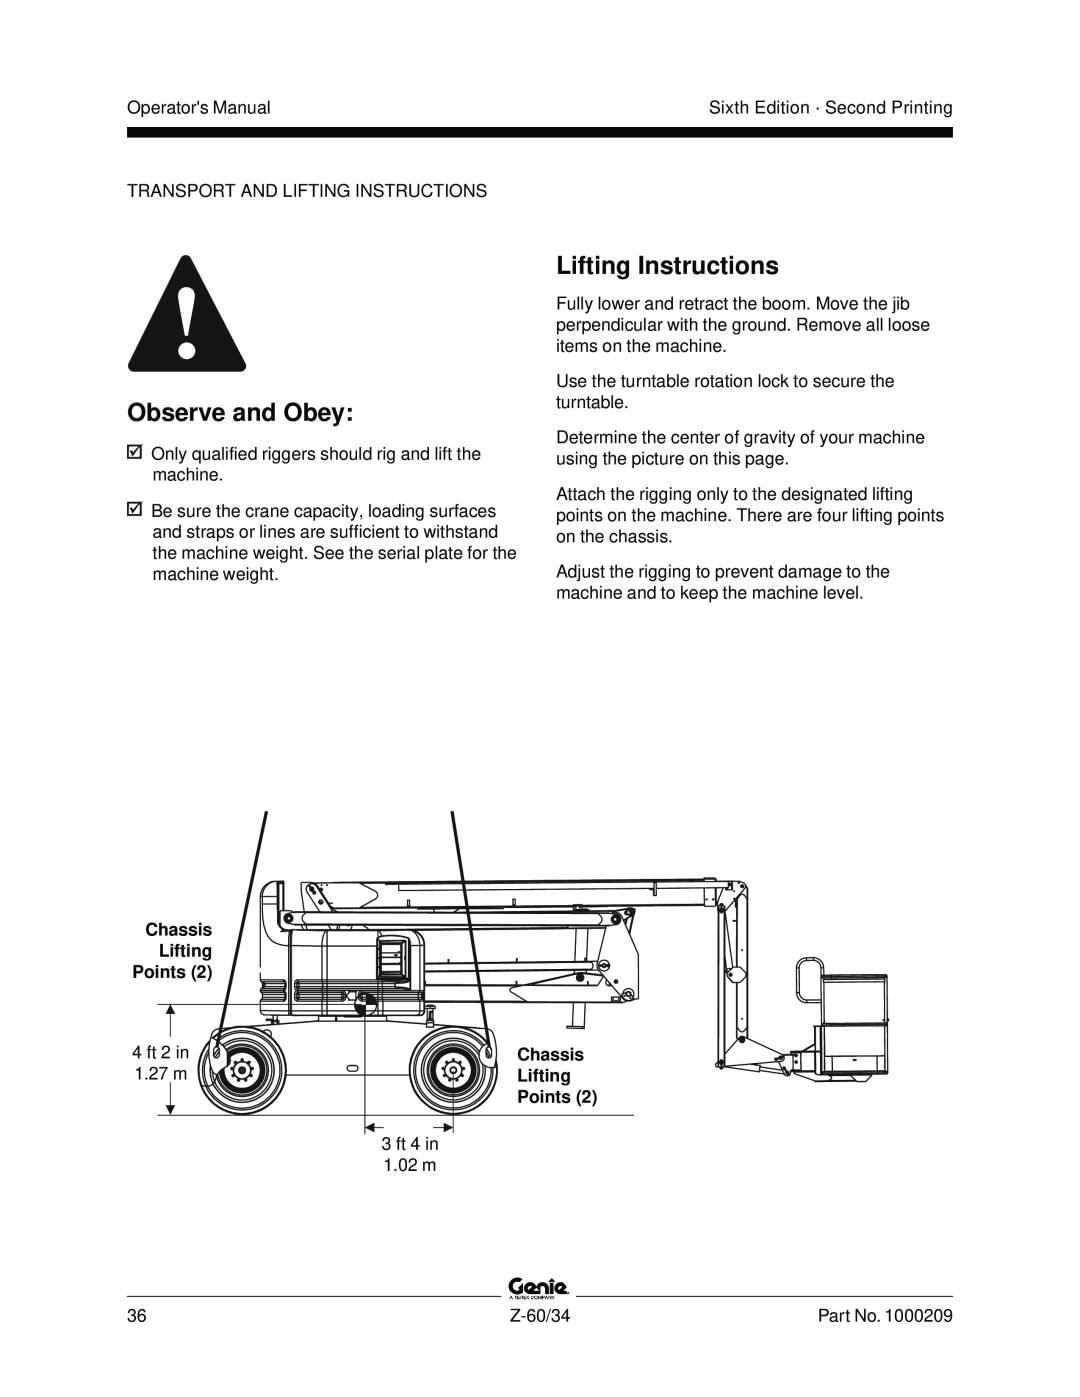 Genie Z-60, Z-34 manual Lifting Instructions, Chassis Lifting Points, Observe and Obey 